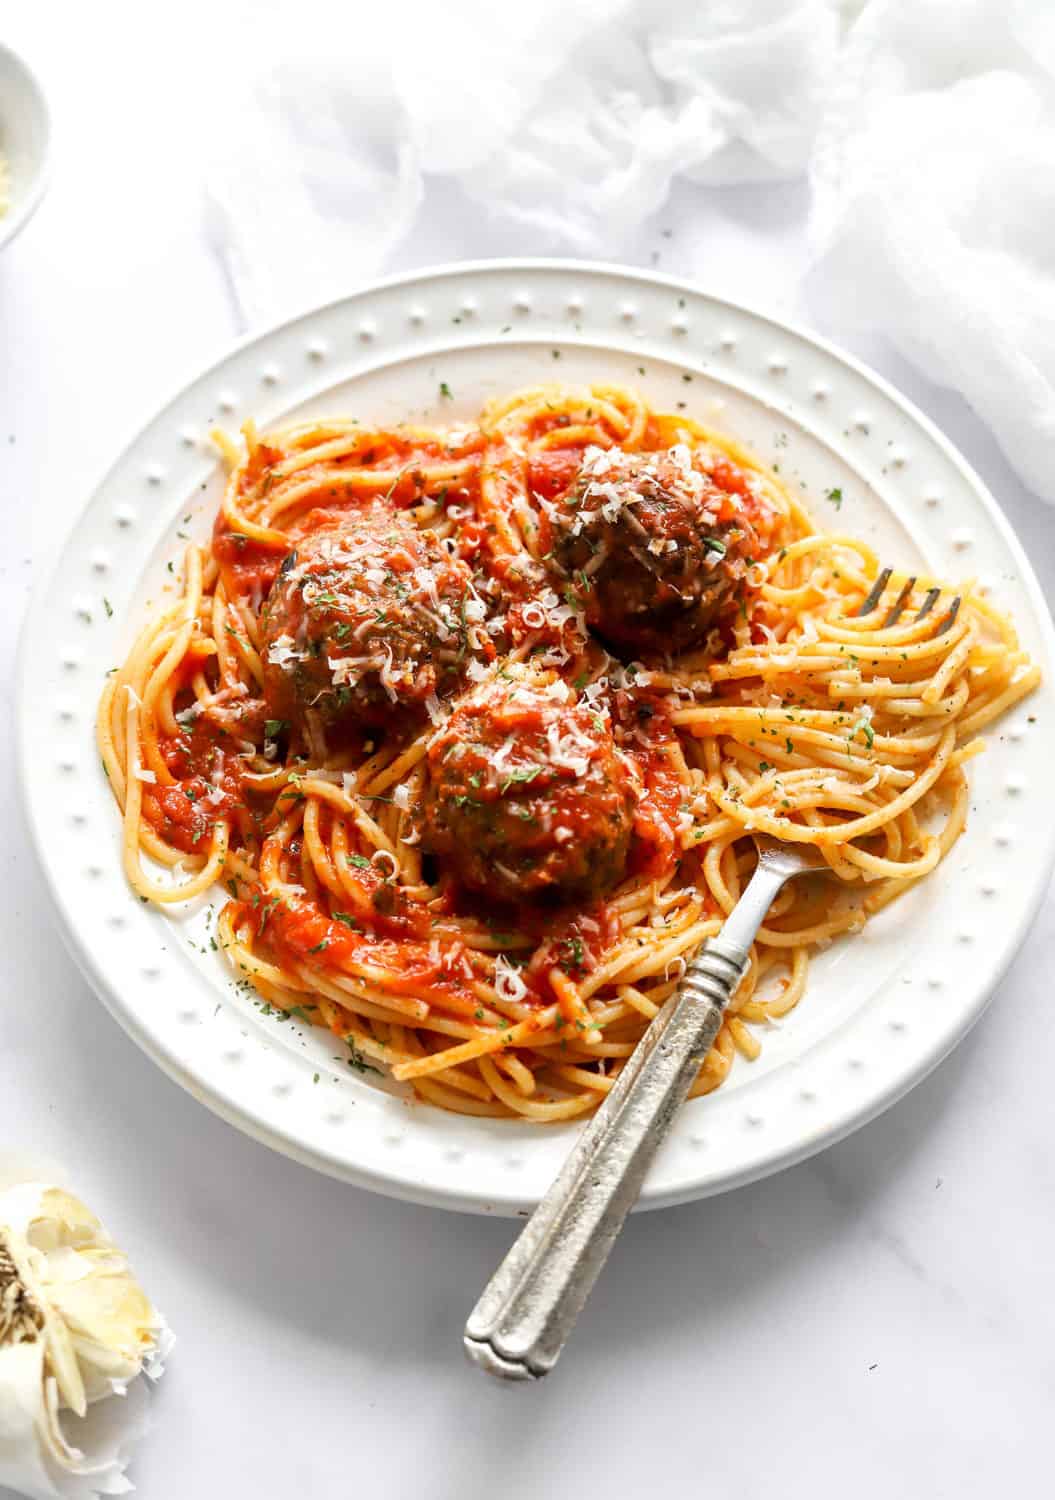 Meatless meatballs layered in red tomato sauce with shredded parmesan on top of them over a bed of cooked spaghetti. 